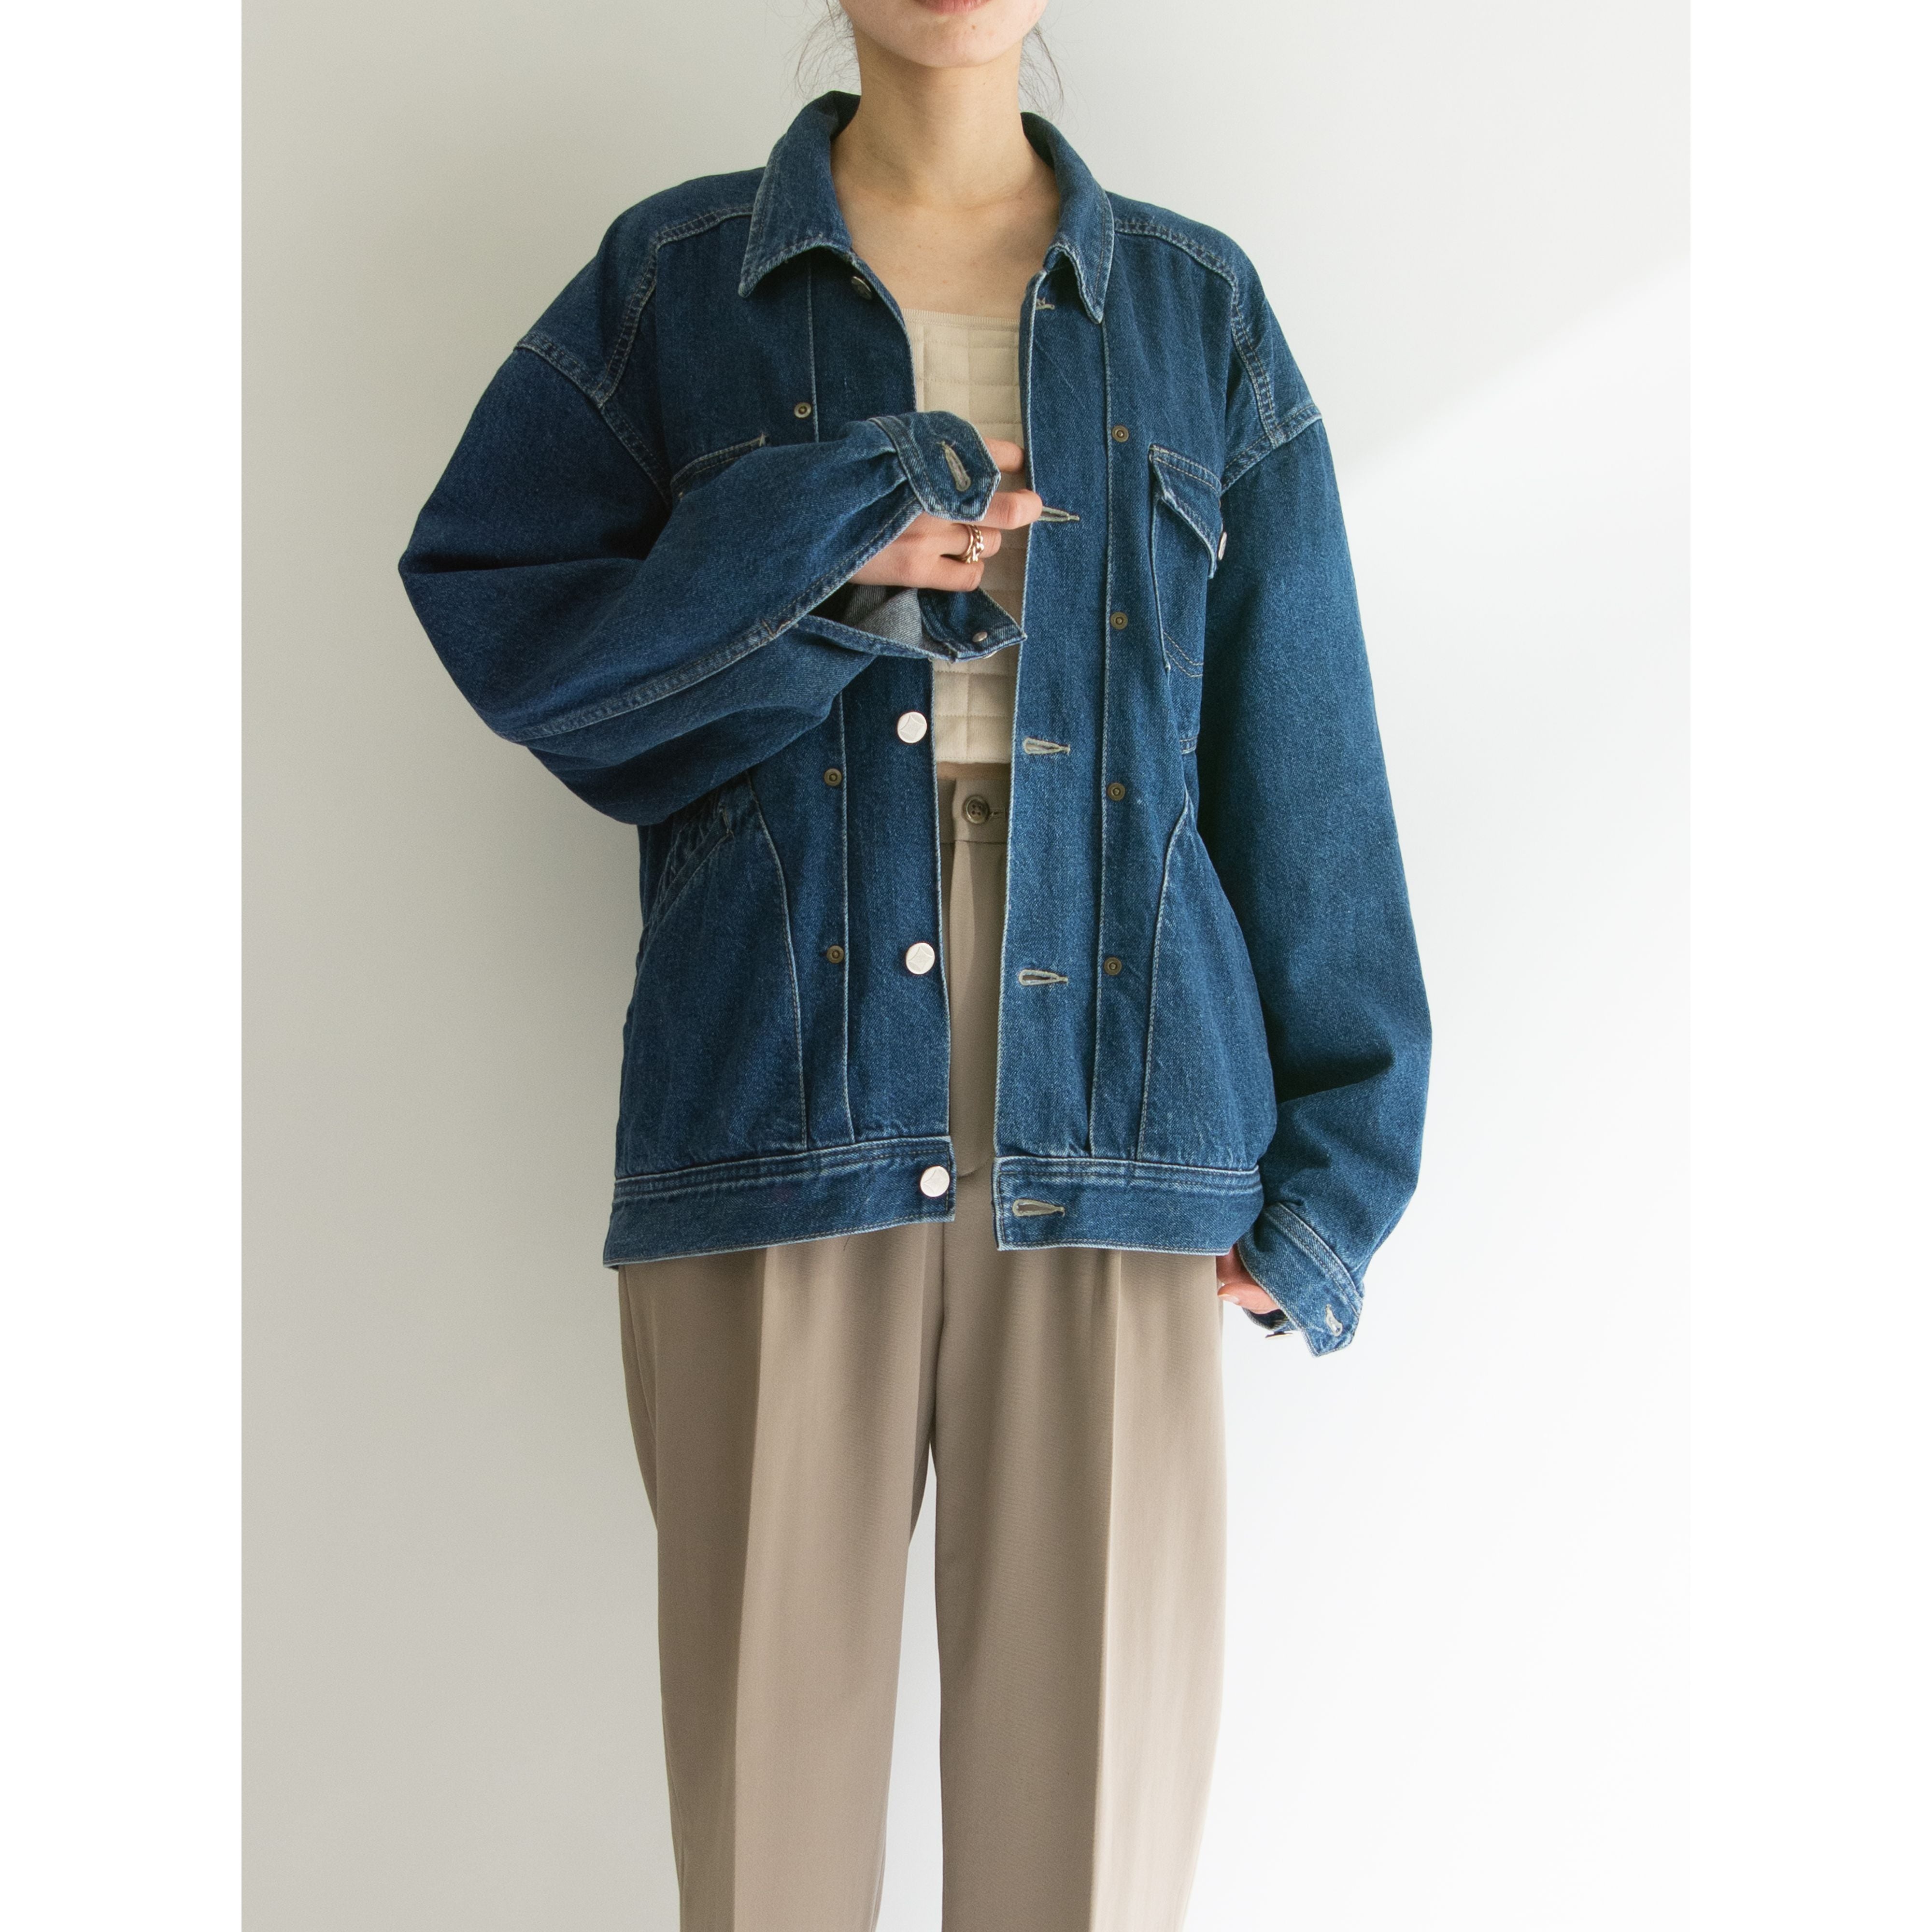 Abahouse】Made in Japan 90's 100% Cotton Denim Jacket（アバハウス